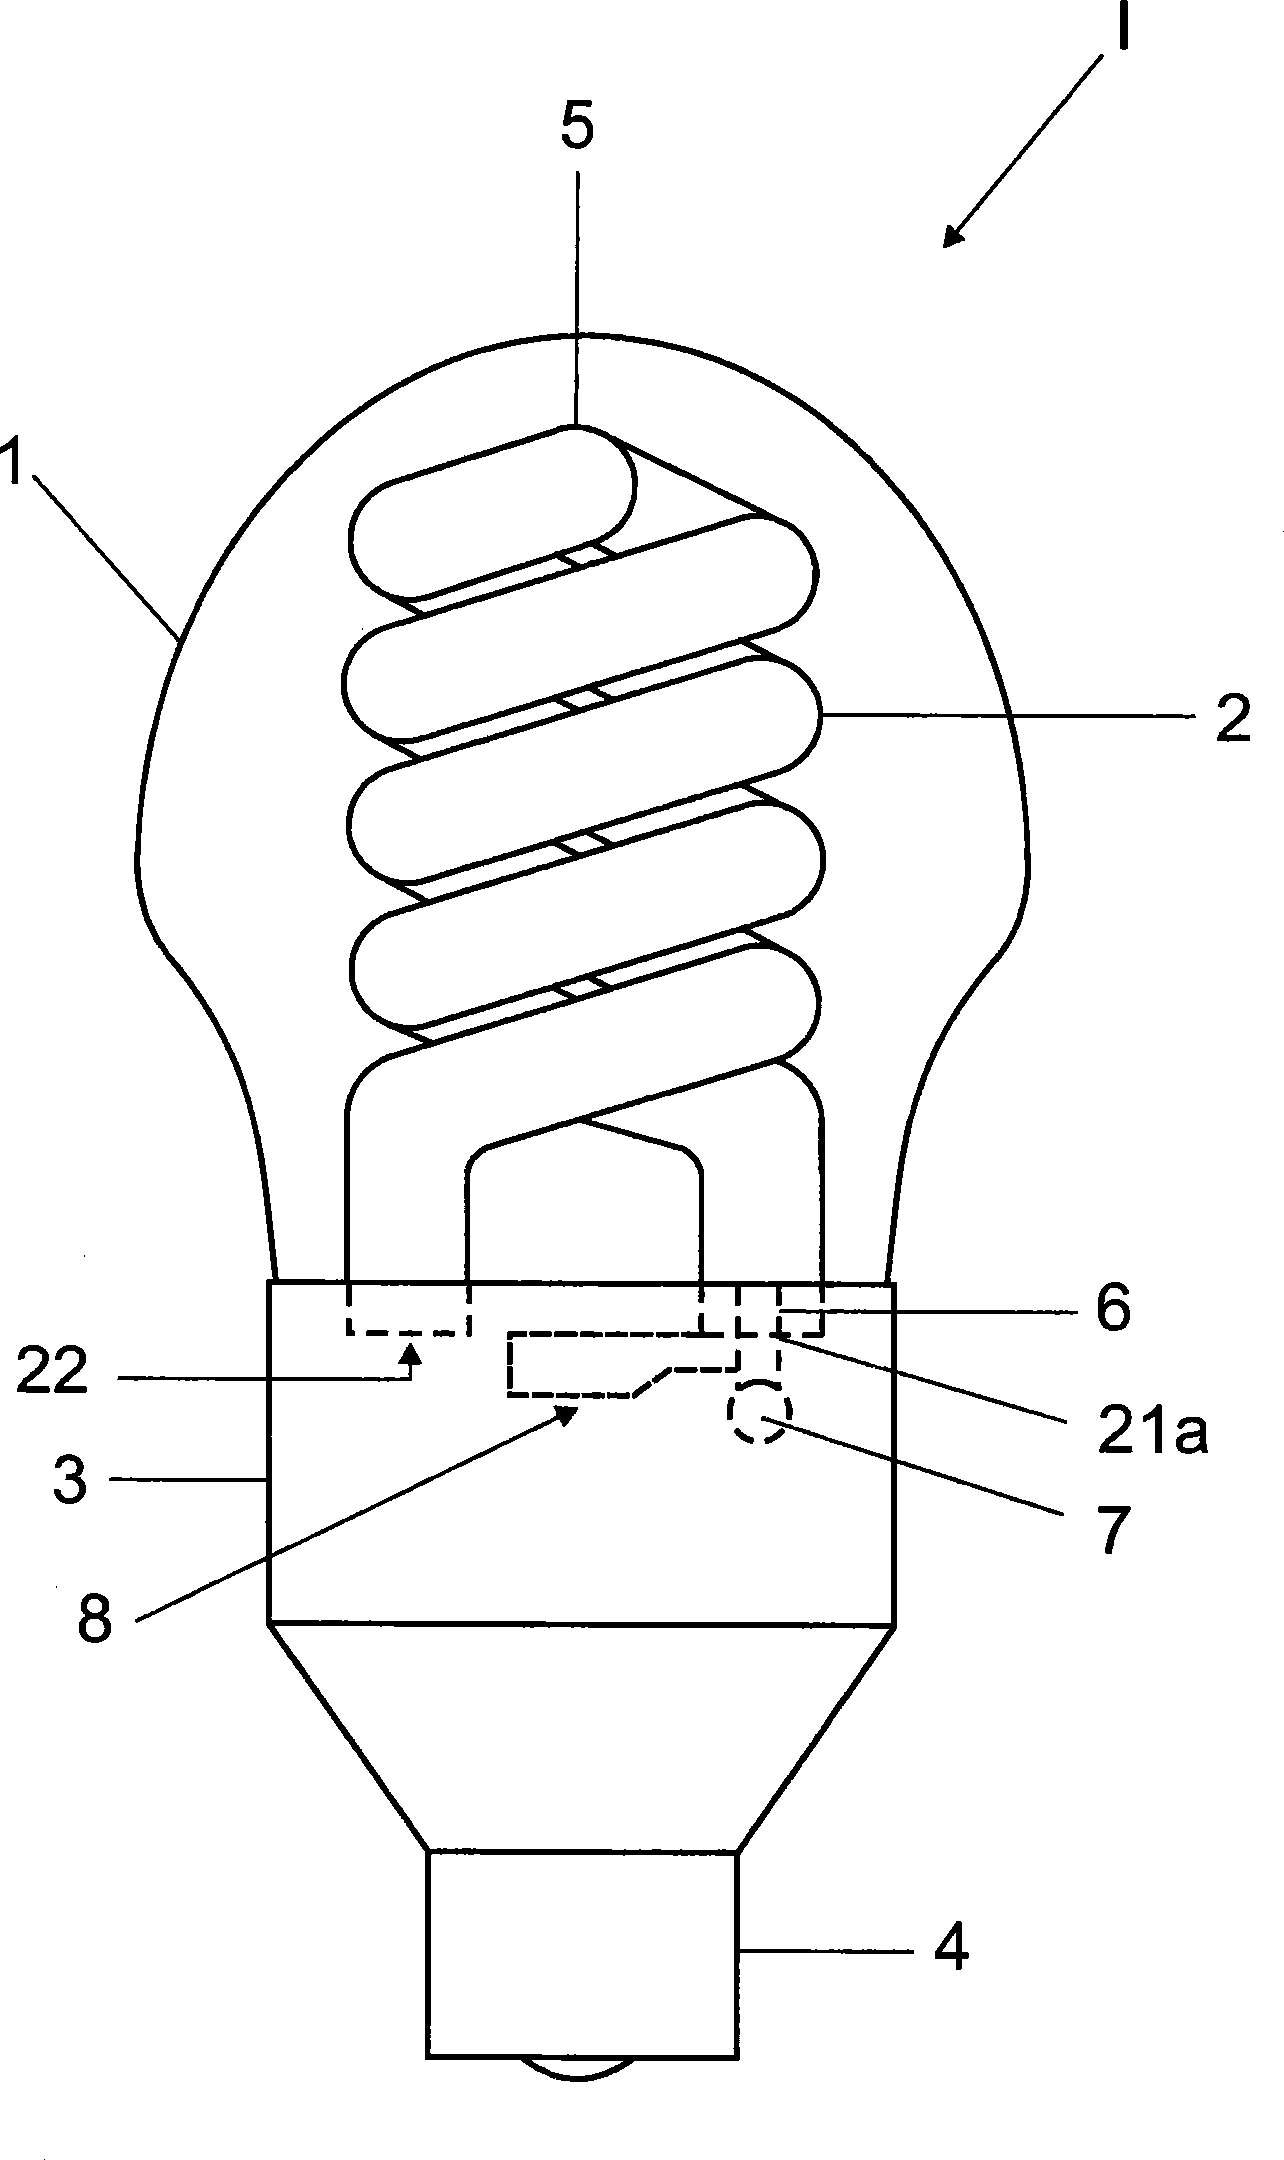 Discharge lamp, in particular low pressure discharge lamp